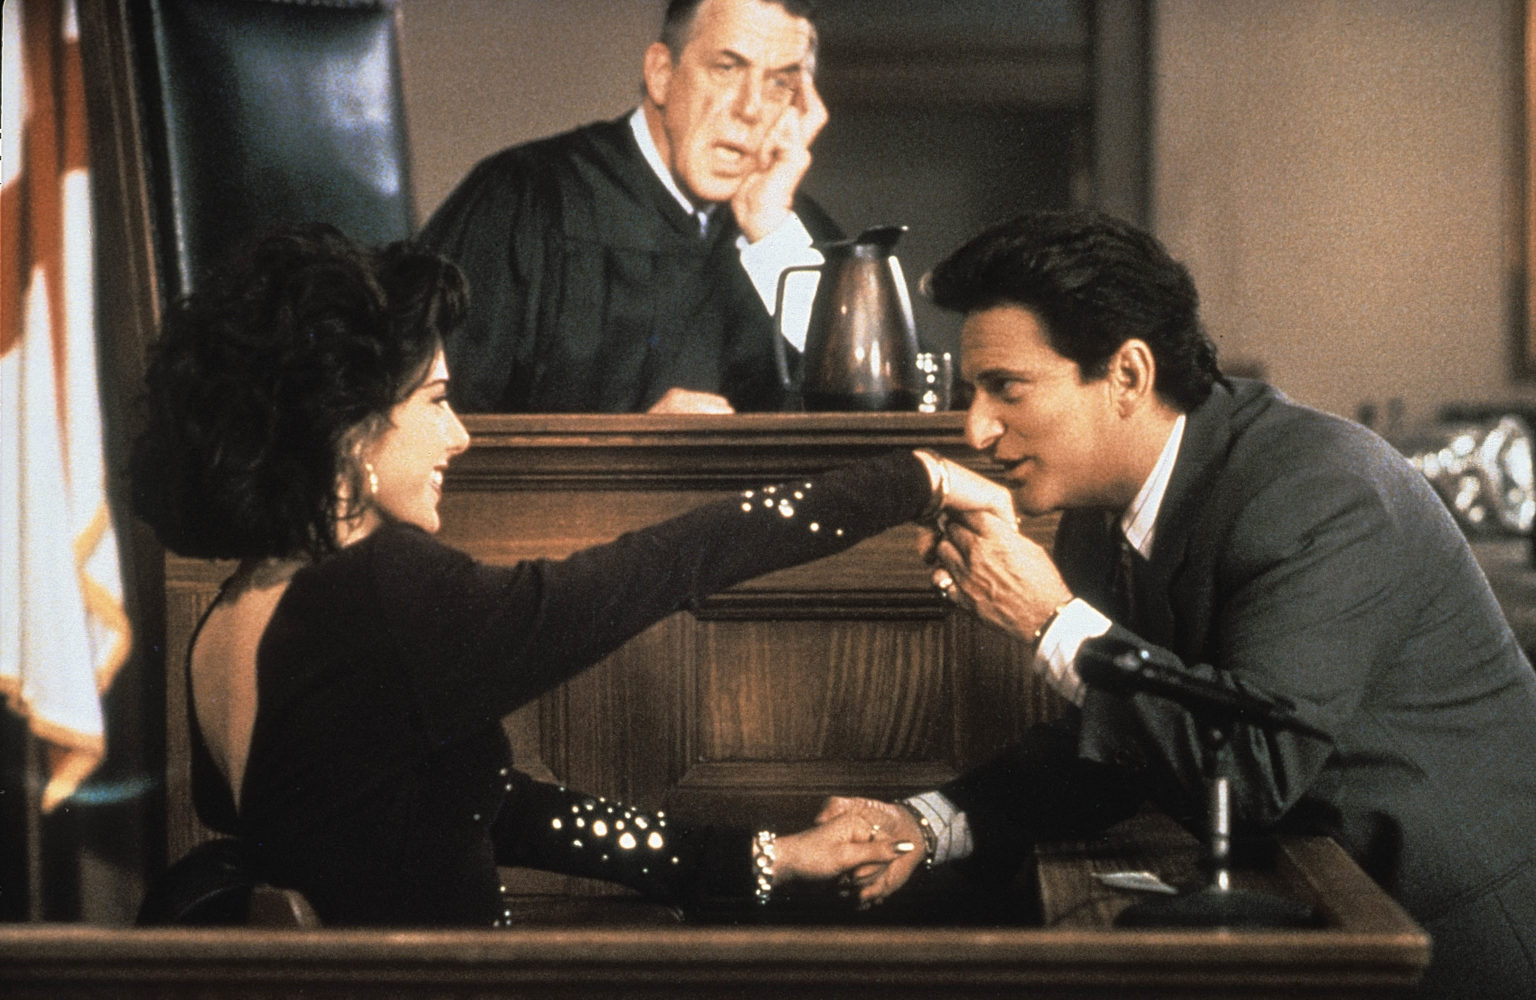 Mona Lisa Vito and Vinny Gambini in court in My Cousin Vinny.